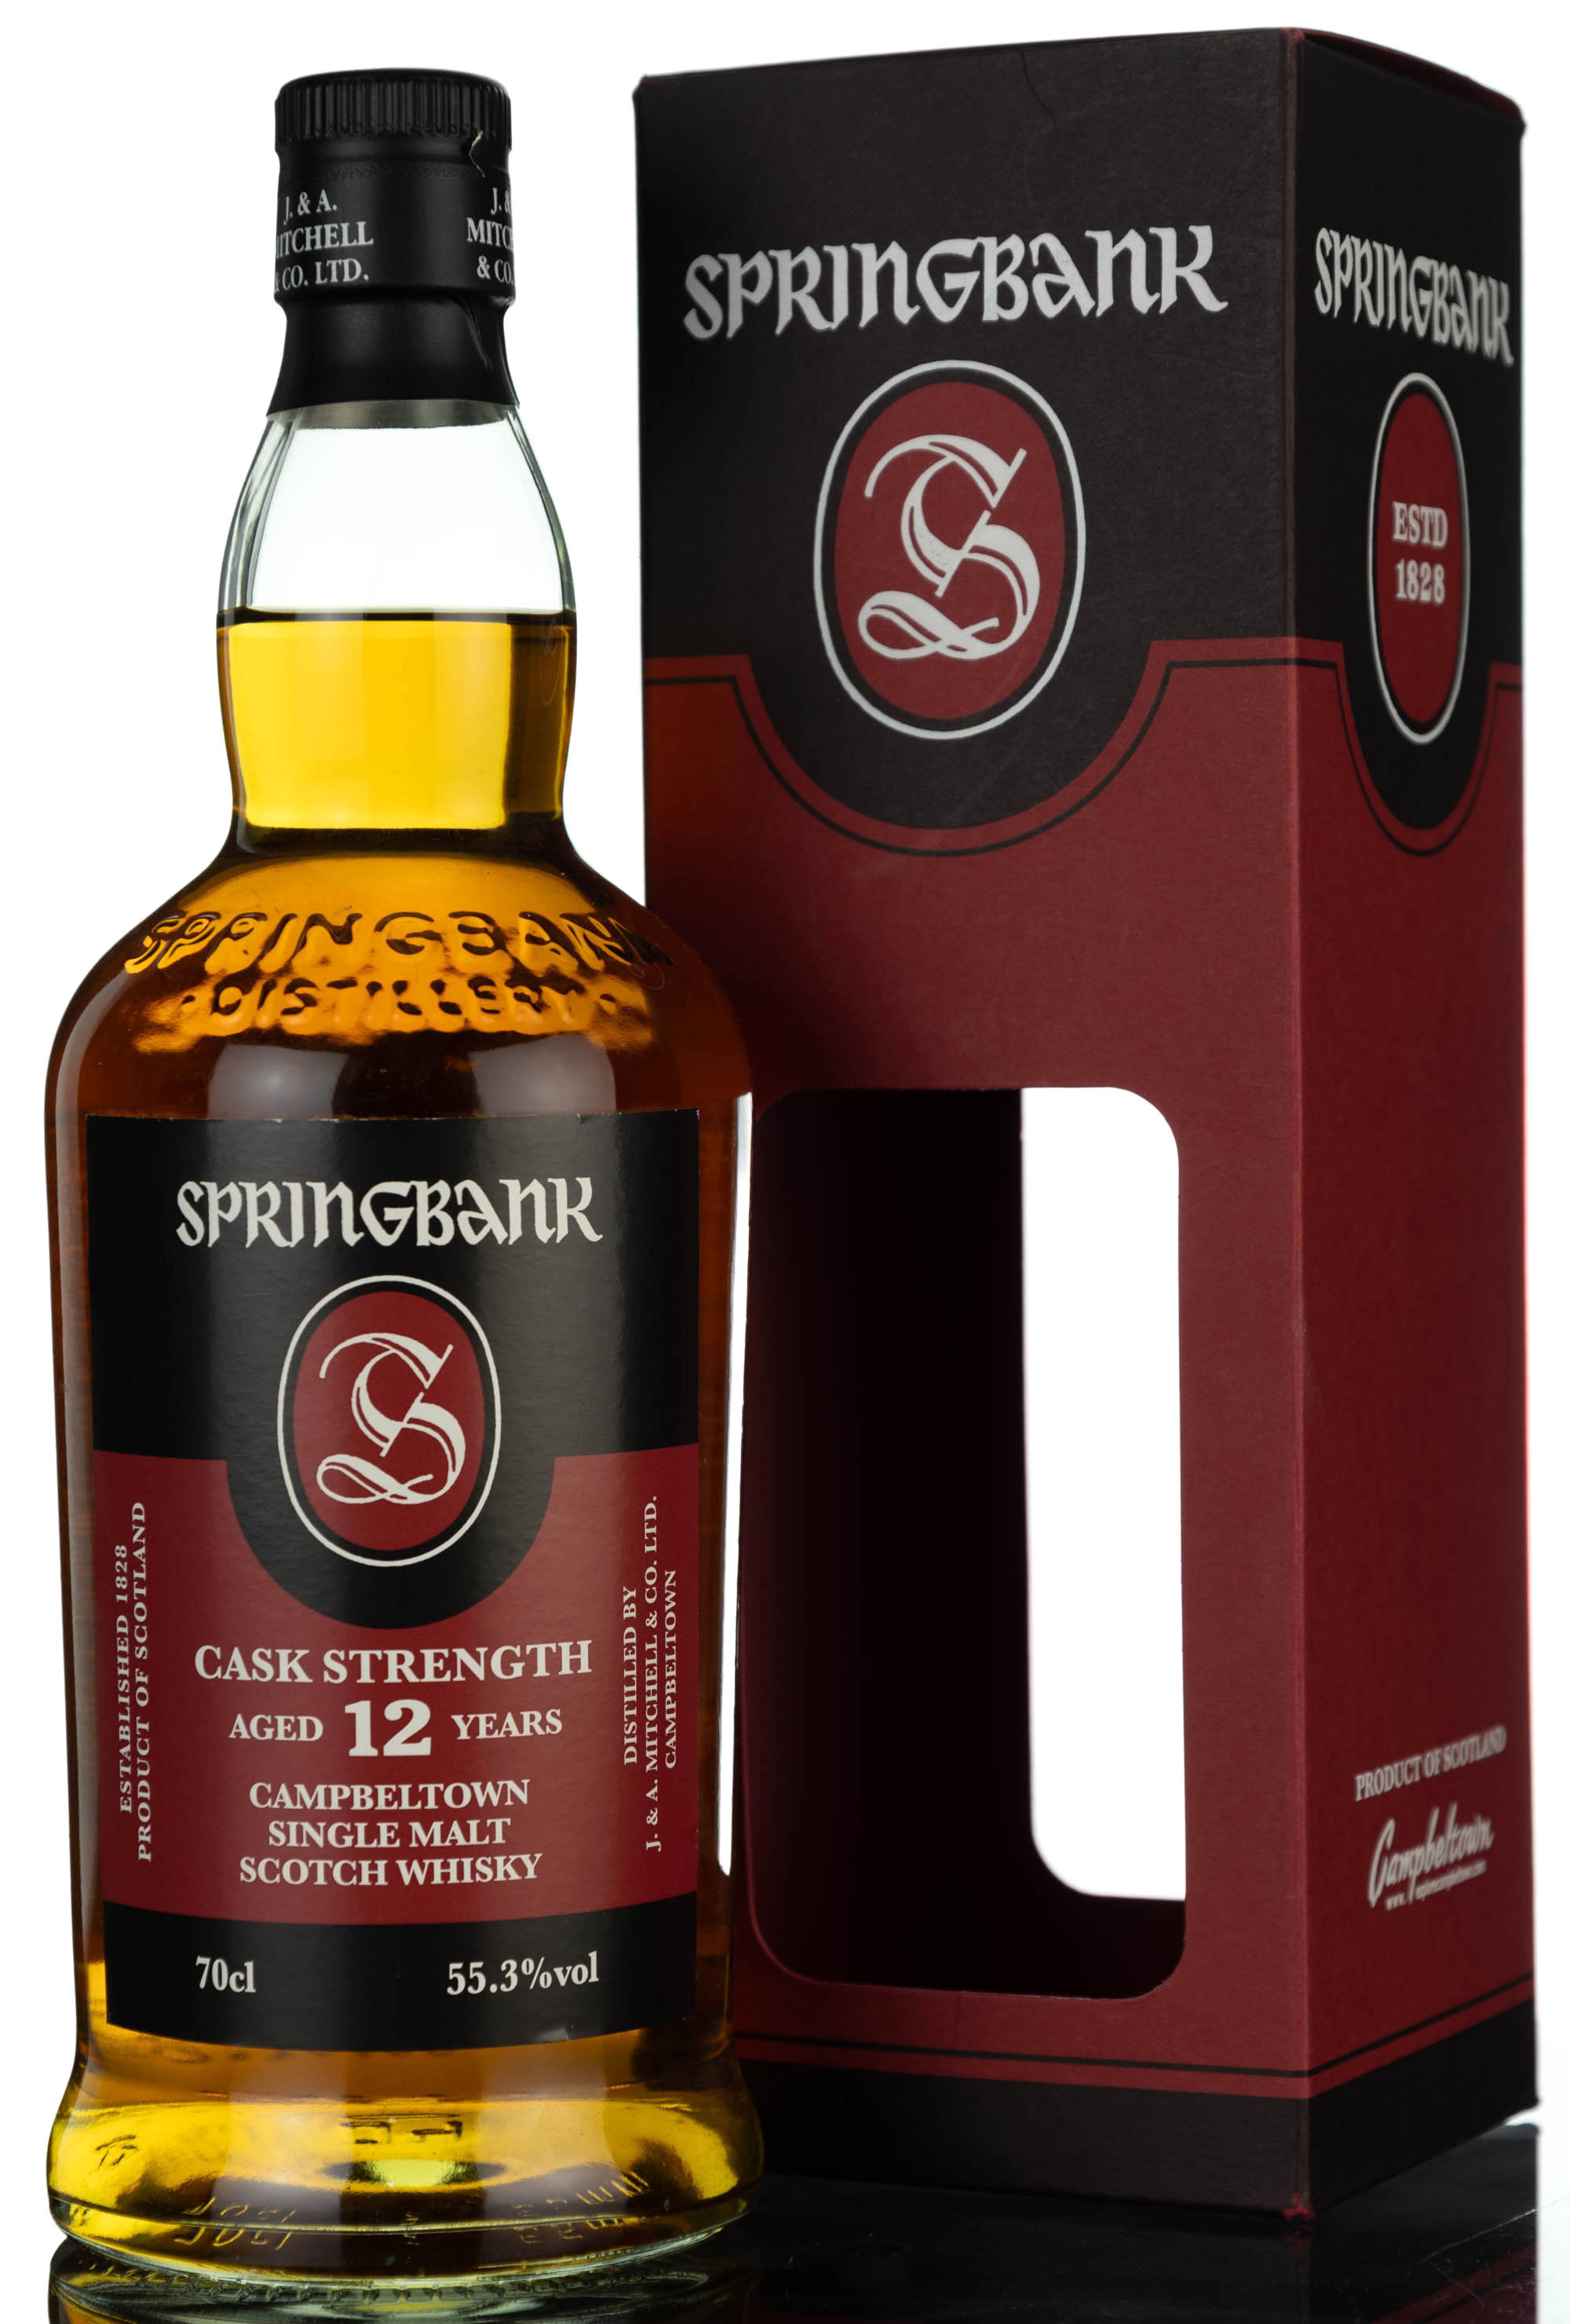 Springbank 12 Year Old - Cask Strength 55.3% - 2020 Release